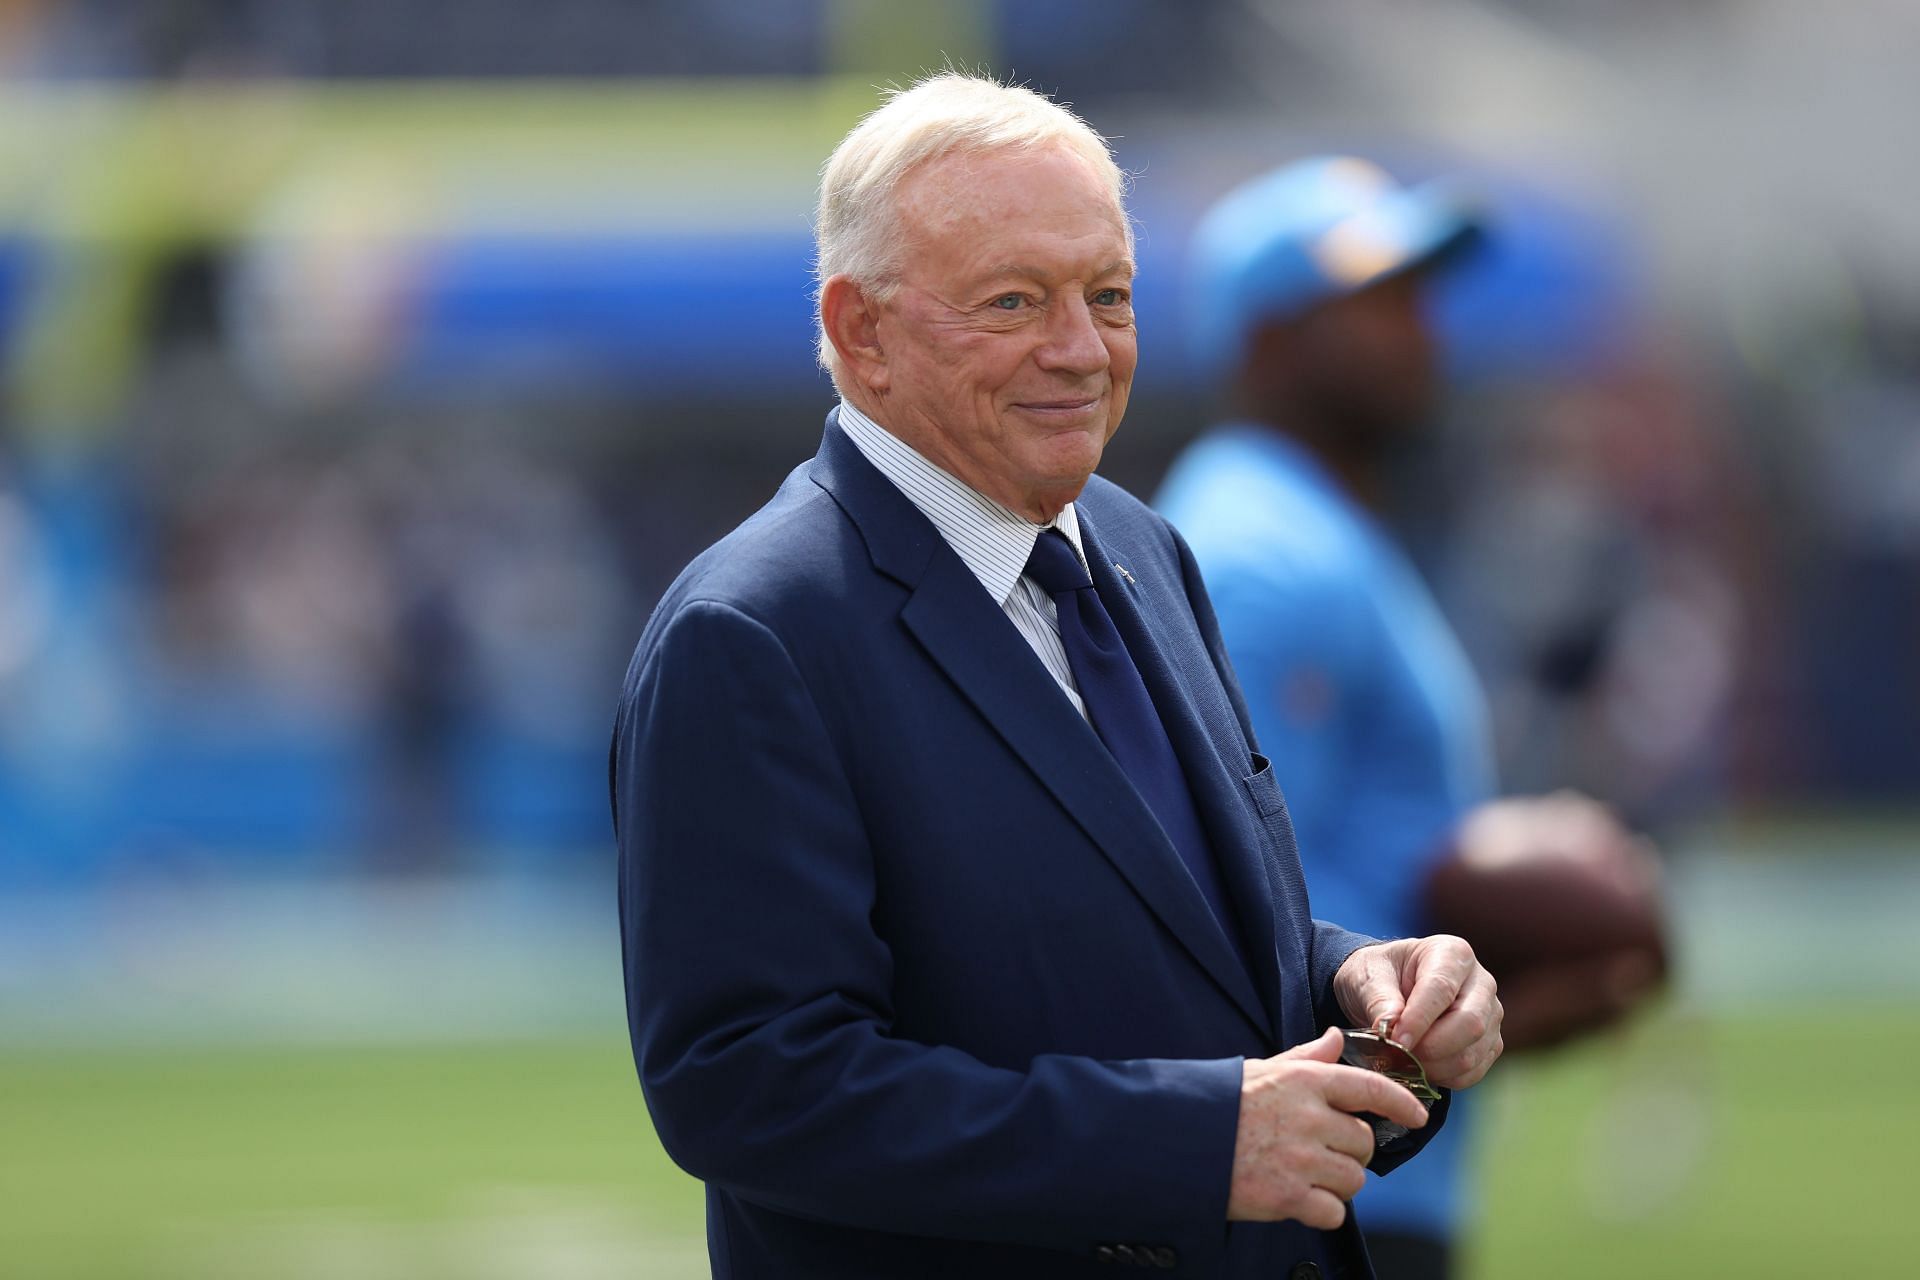 The Dallas Cowboys owner since 1989